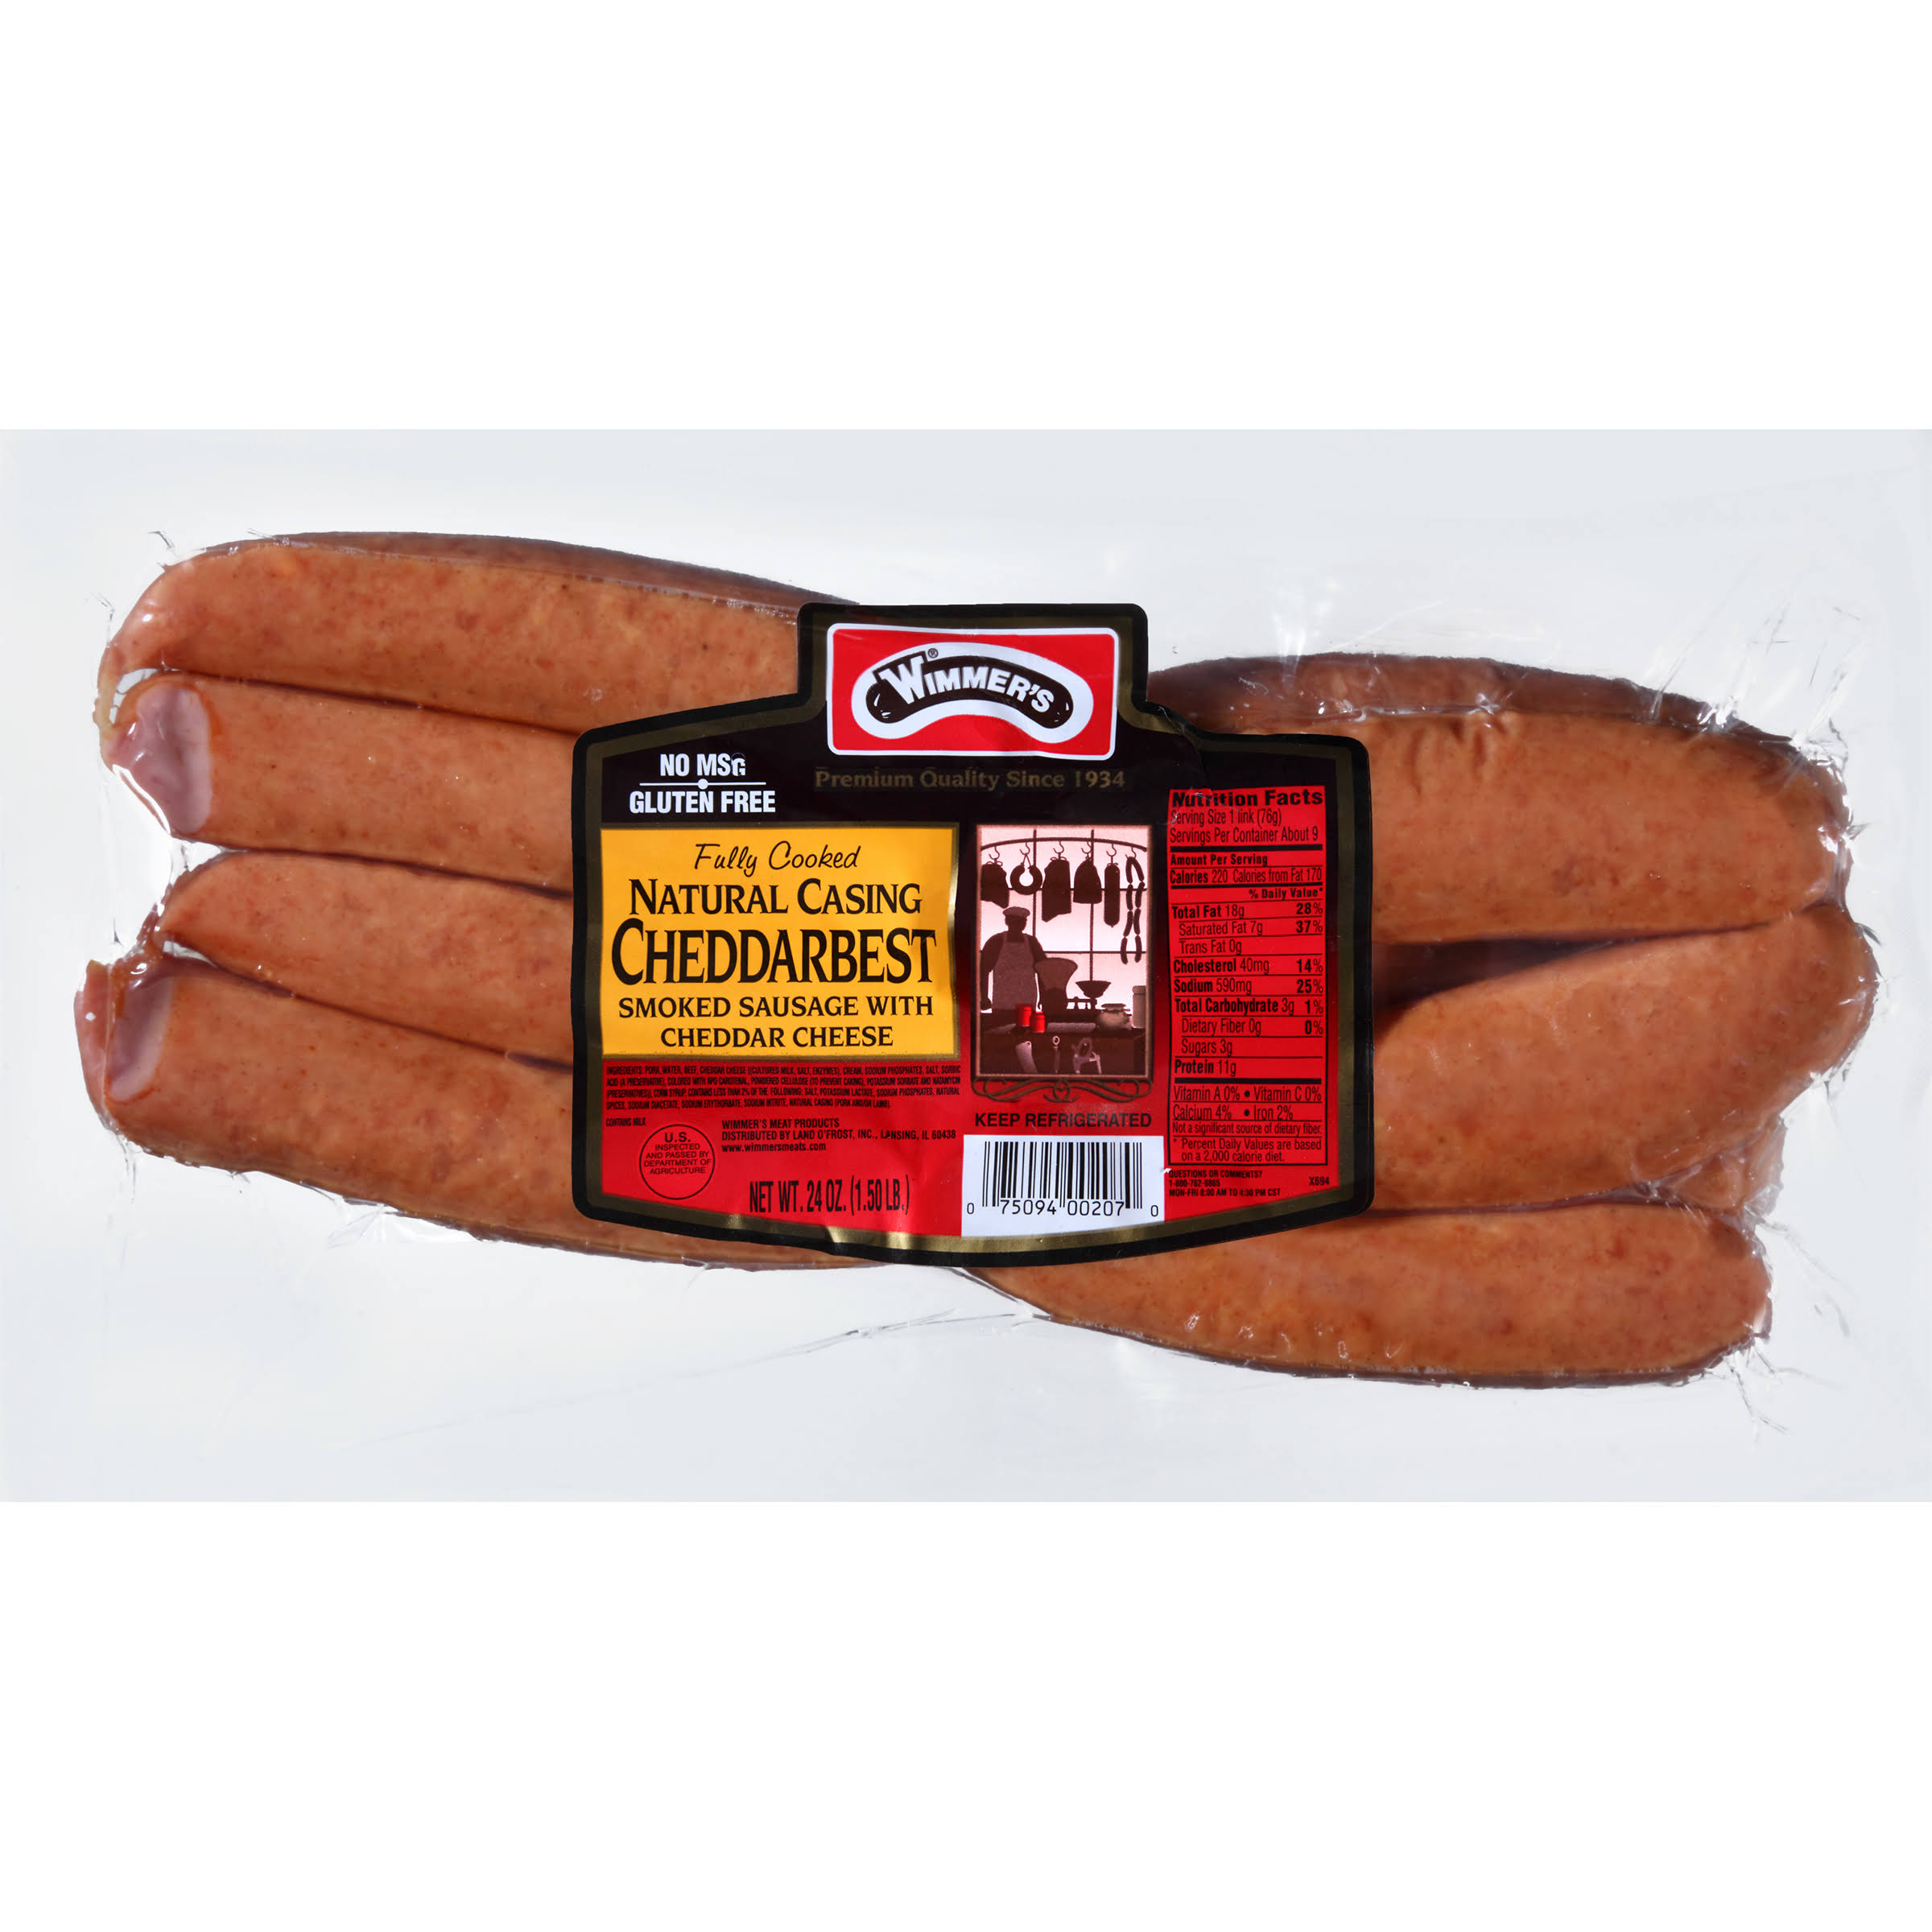 Wimmer's Natural Casing Cheddarbest with Cheddar Cheese Smoked Sausage